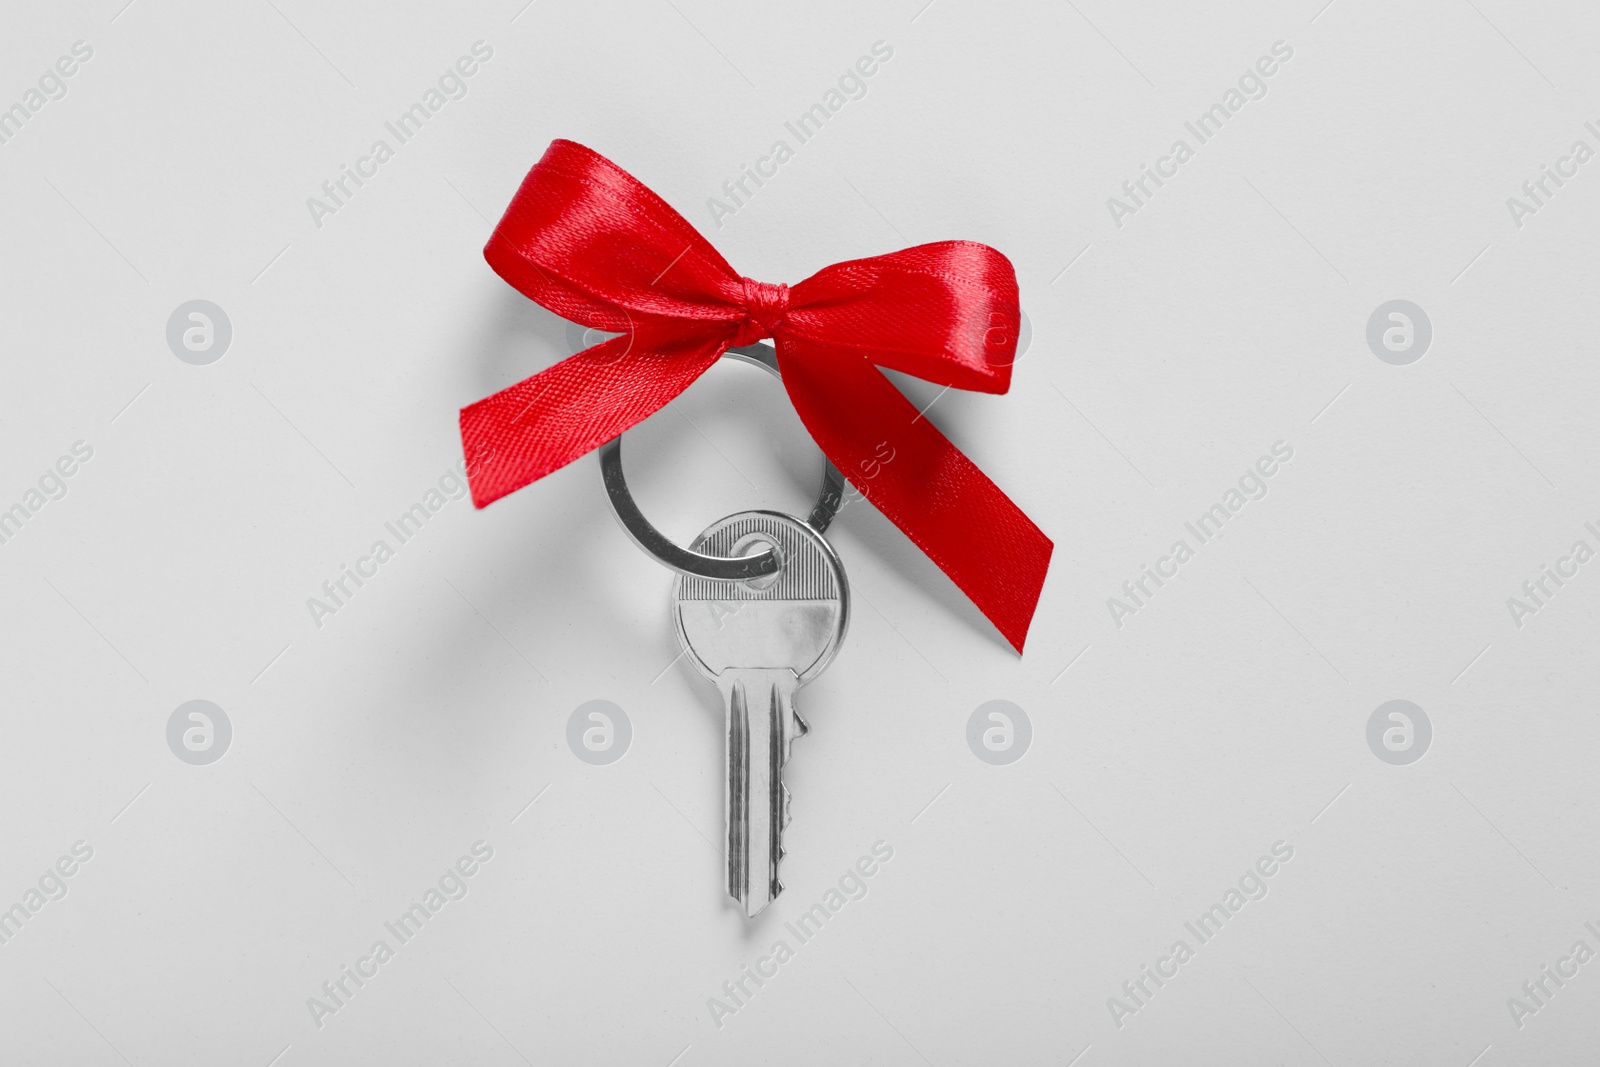 Photo of Key with trinket in shape of house and red bow on light grey background, top view. Housewarming party